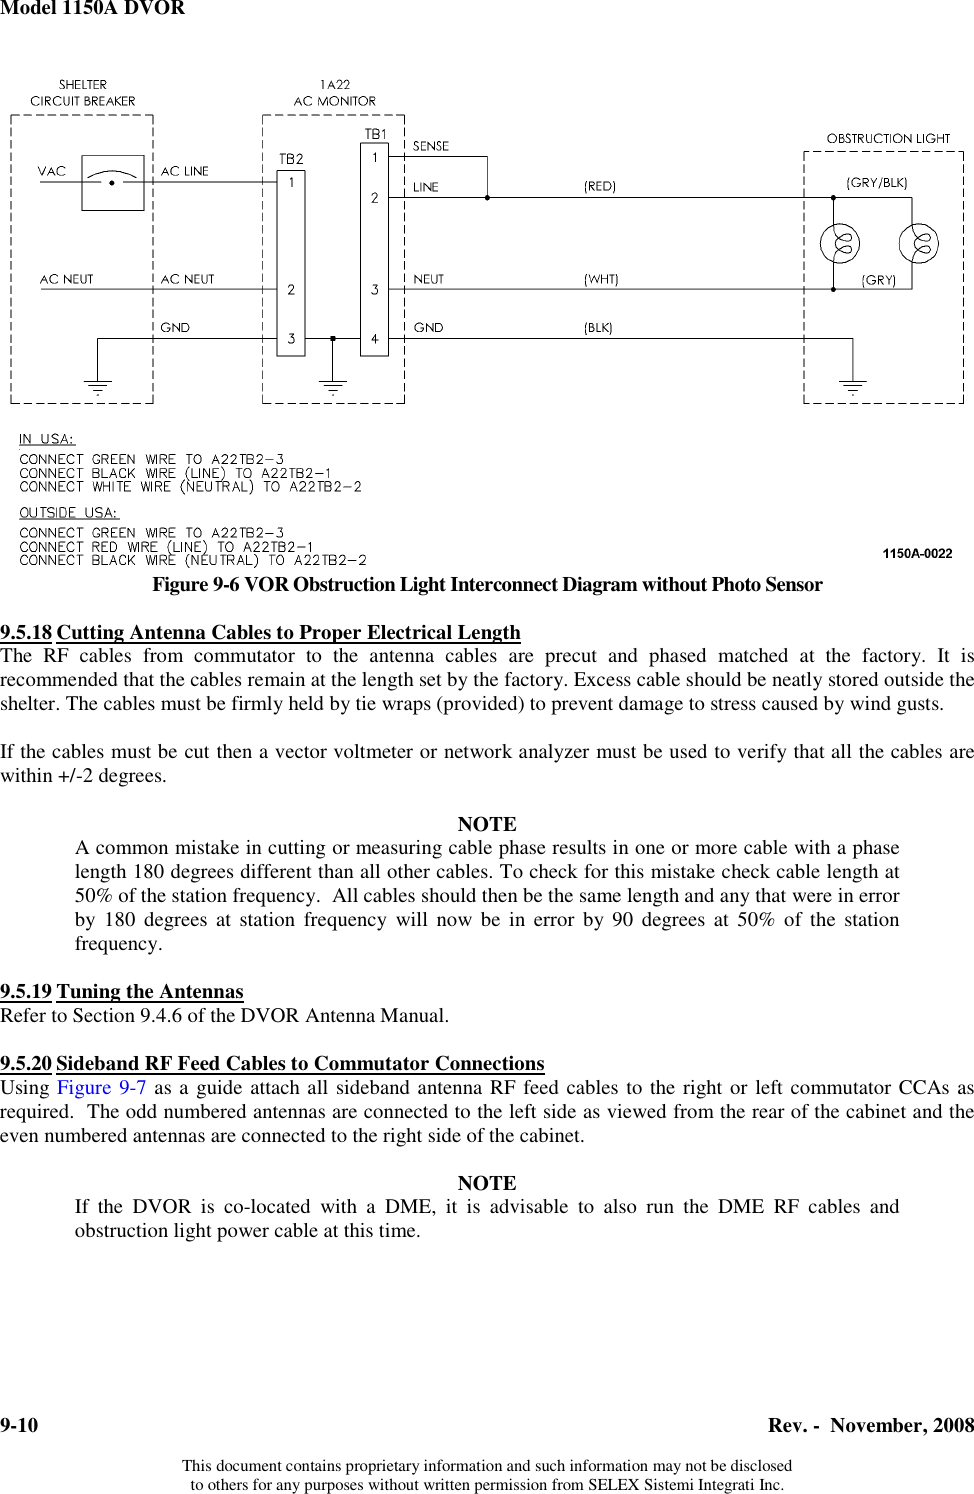 Model 1150A DVOR  9-10  Rev. -  November, 2008  This document contains proprietary information and such information may not be disclosed to others for any purposes without written permission from SELEX Sistemi Integrati Inc. Figure 9-6 VOR Obstruction Light Interconnect Diagram without Photo Sensor  9.5.18 Cutting Antenna Cables to Proper Electrical LengthThe RF cables from commutator to the antenna cables are precut and phased matched at the factory. It is recommended that the cables remain at the length set by the factory. Excess cable should be neatly stored outside the shelter. The cables must be firmly held by tie wraps (provided) to prevent damage to stress caused by wind gusts.  If the cables must be cut then a vector voltmeter or network analyzer must be used to verify that all the cables are within +/-2 degrees.  NOTE Acommon mistake in cutting or measuring cable phase results in one or more cable with a phase length 180 degrees different than all other cables. To check for this mistake check cable length at 50% of the station frequency.  All cables should then be the same length and any that were in error by 180 degrees at station frequency will now be in error by 90 degrees at 50% of the station frequency.  9.5.19 Tuning the AntennasRefer to Section 9.4.6 of the DVOR Antenna Manual.  9.5.20 Sideband RF Feed Cables to Commutator ConnectionsUsing Figure 9-7 as a guide attach all sideband antenna RF feed cables to the right or left commutator CCAs as required.  The odd numbered antennas are connected to the left side as viewed from the rear of the cabinet and the even numbered antennas are connected to the right side of the cabinet.  NOTE If the DVOR is co-located with a DME, it is advisable to also run the DME RF cables and obstruction light power cable at this time. 